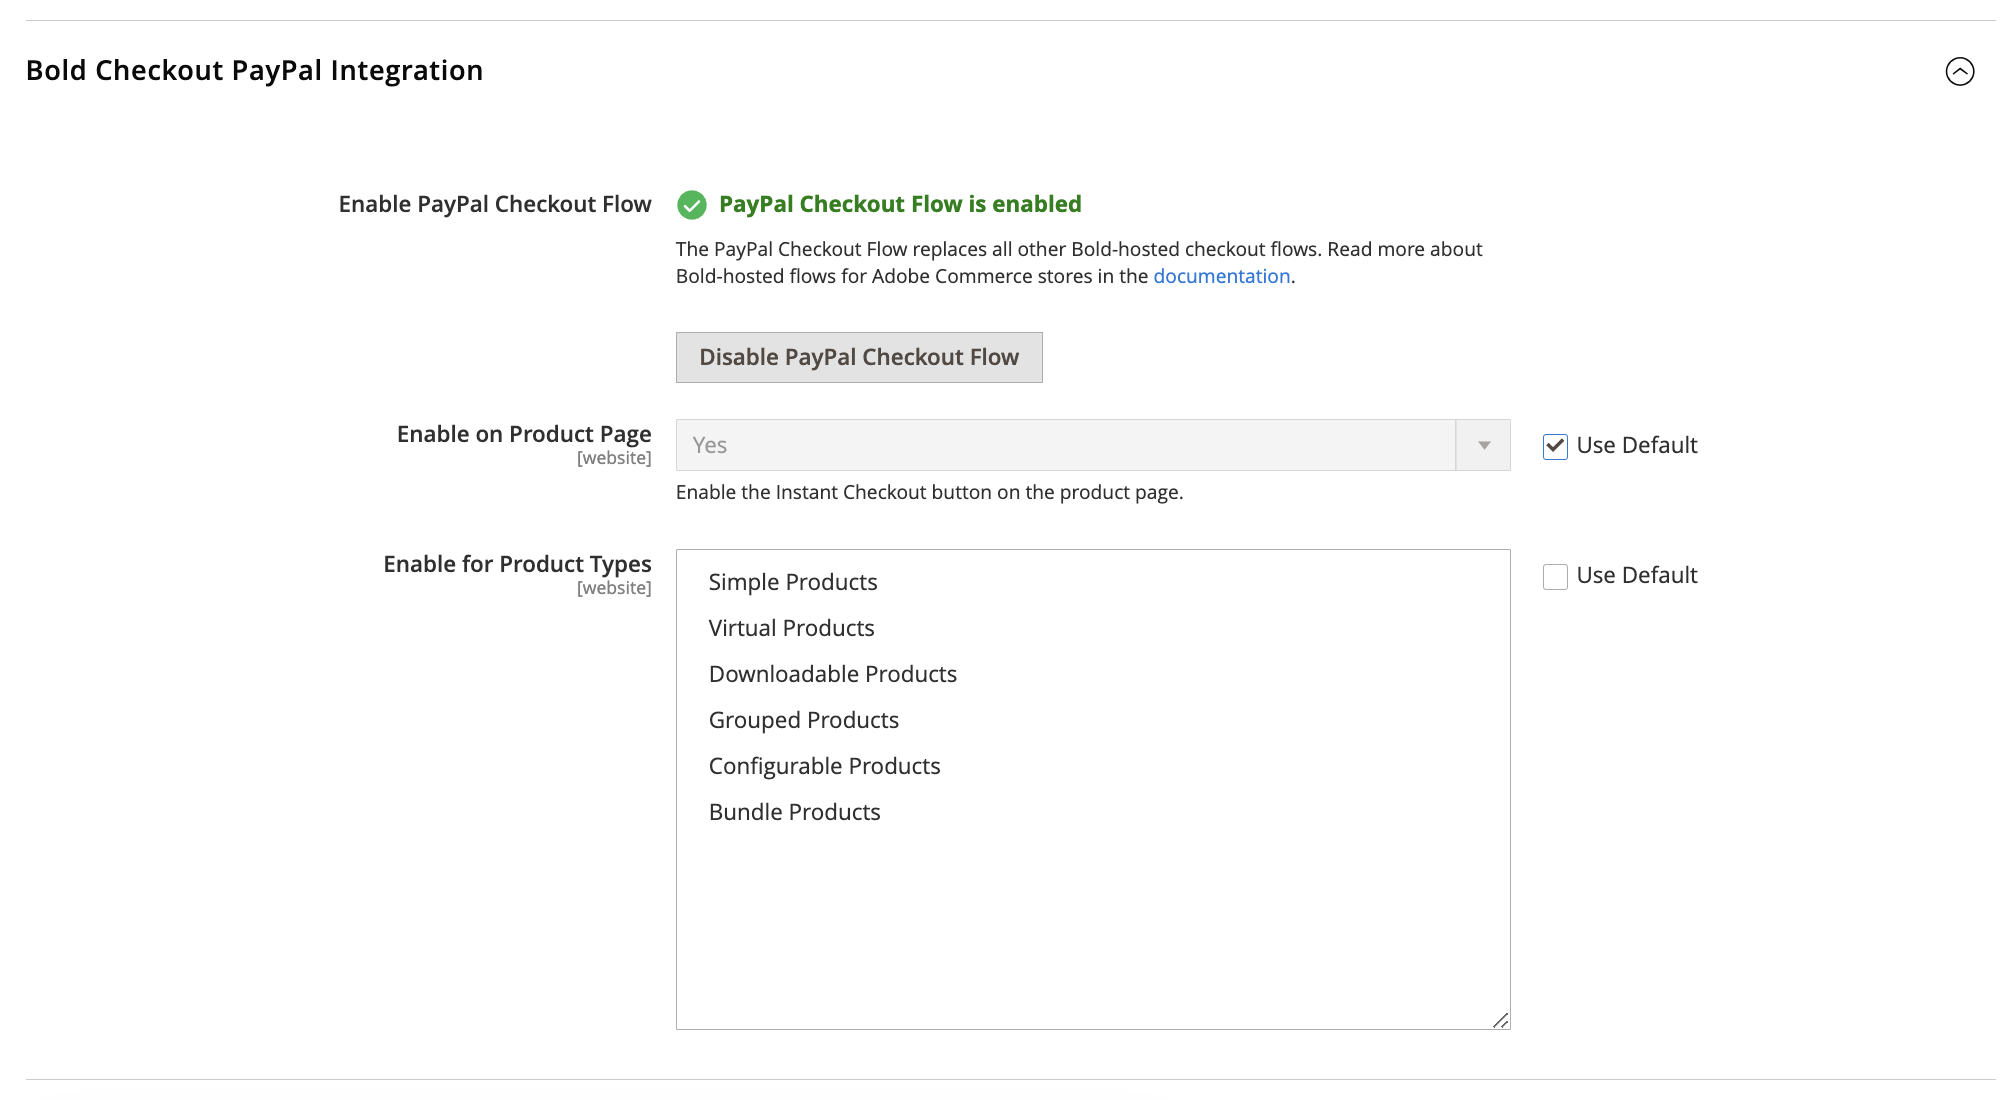 Screenshot of the expanded Bold Checkout PayPal Integration section in the Adobe Commerce Admin. The flow is enabled.